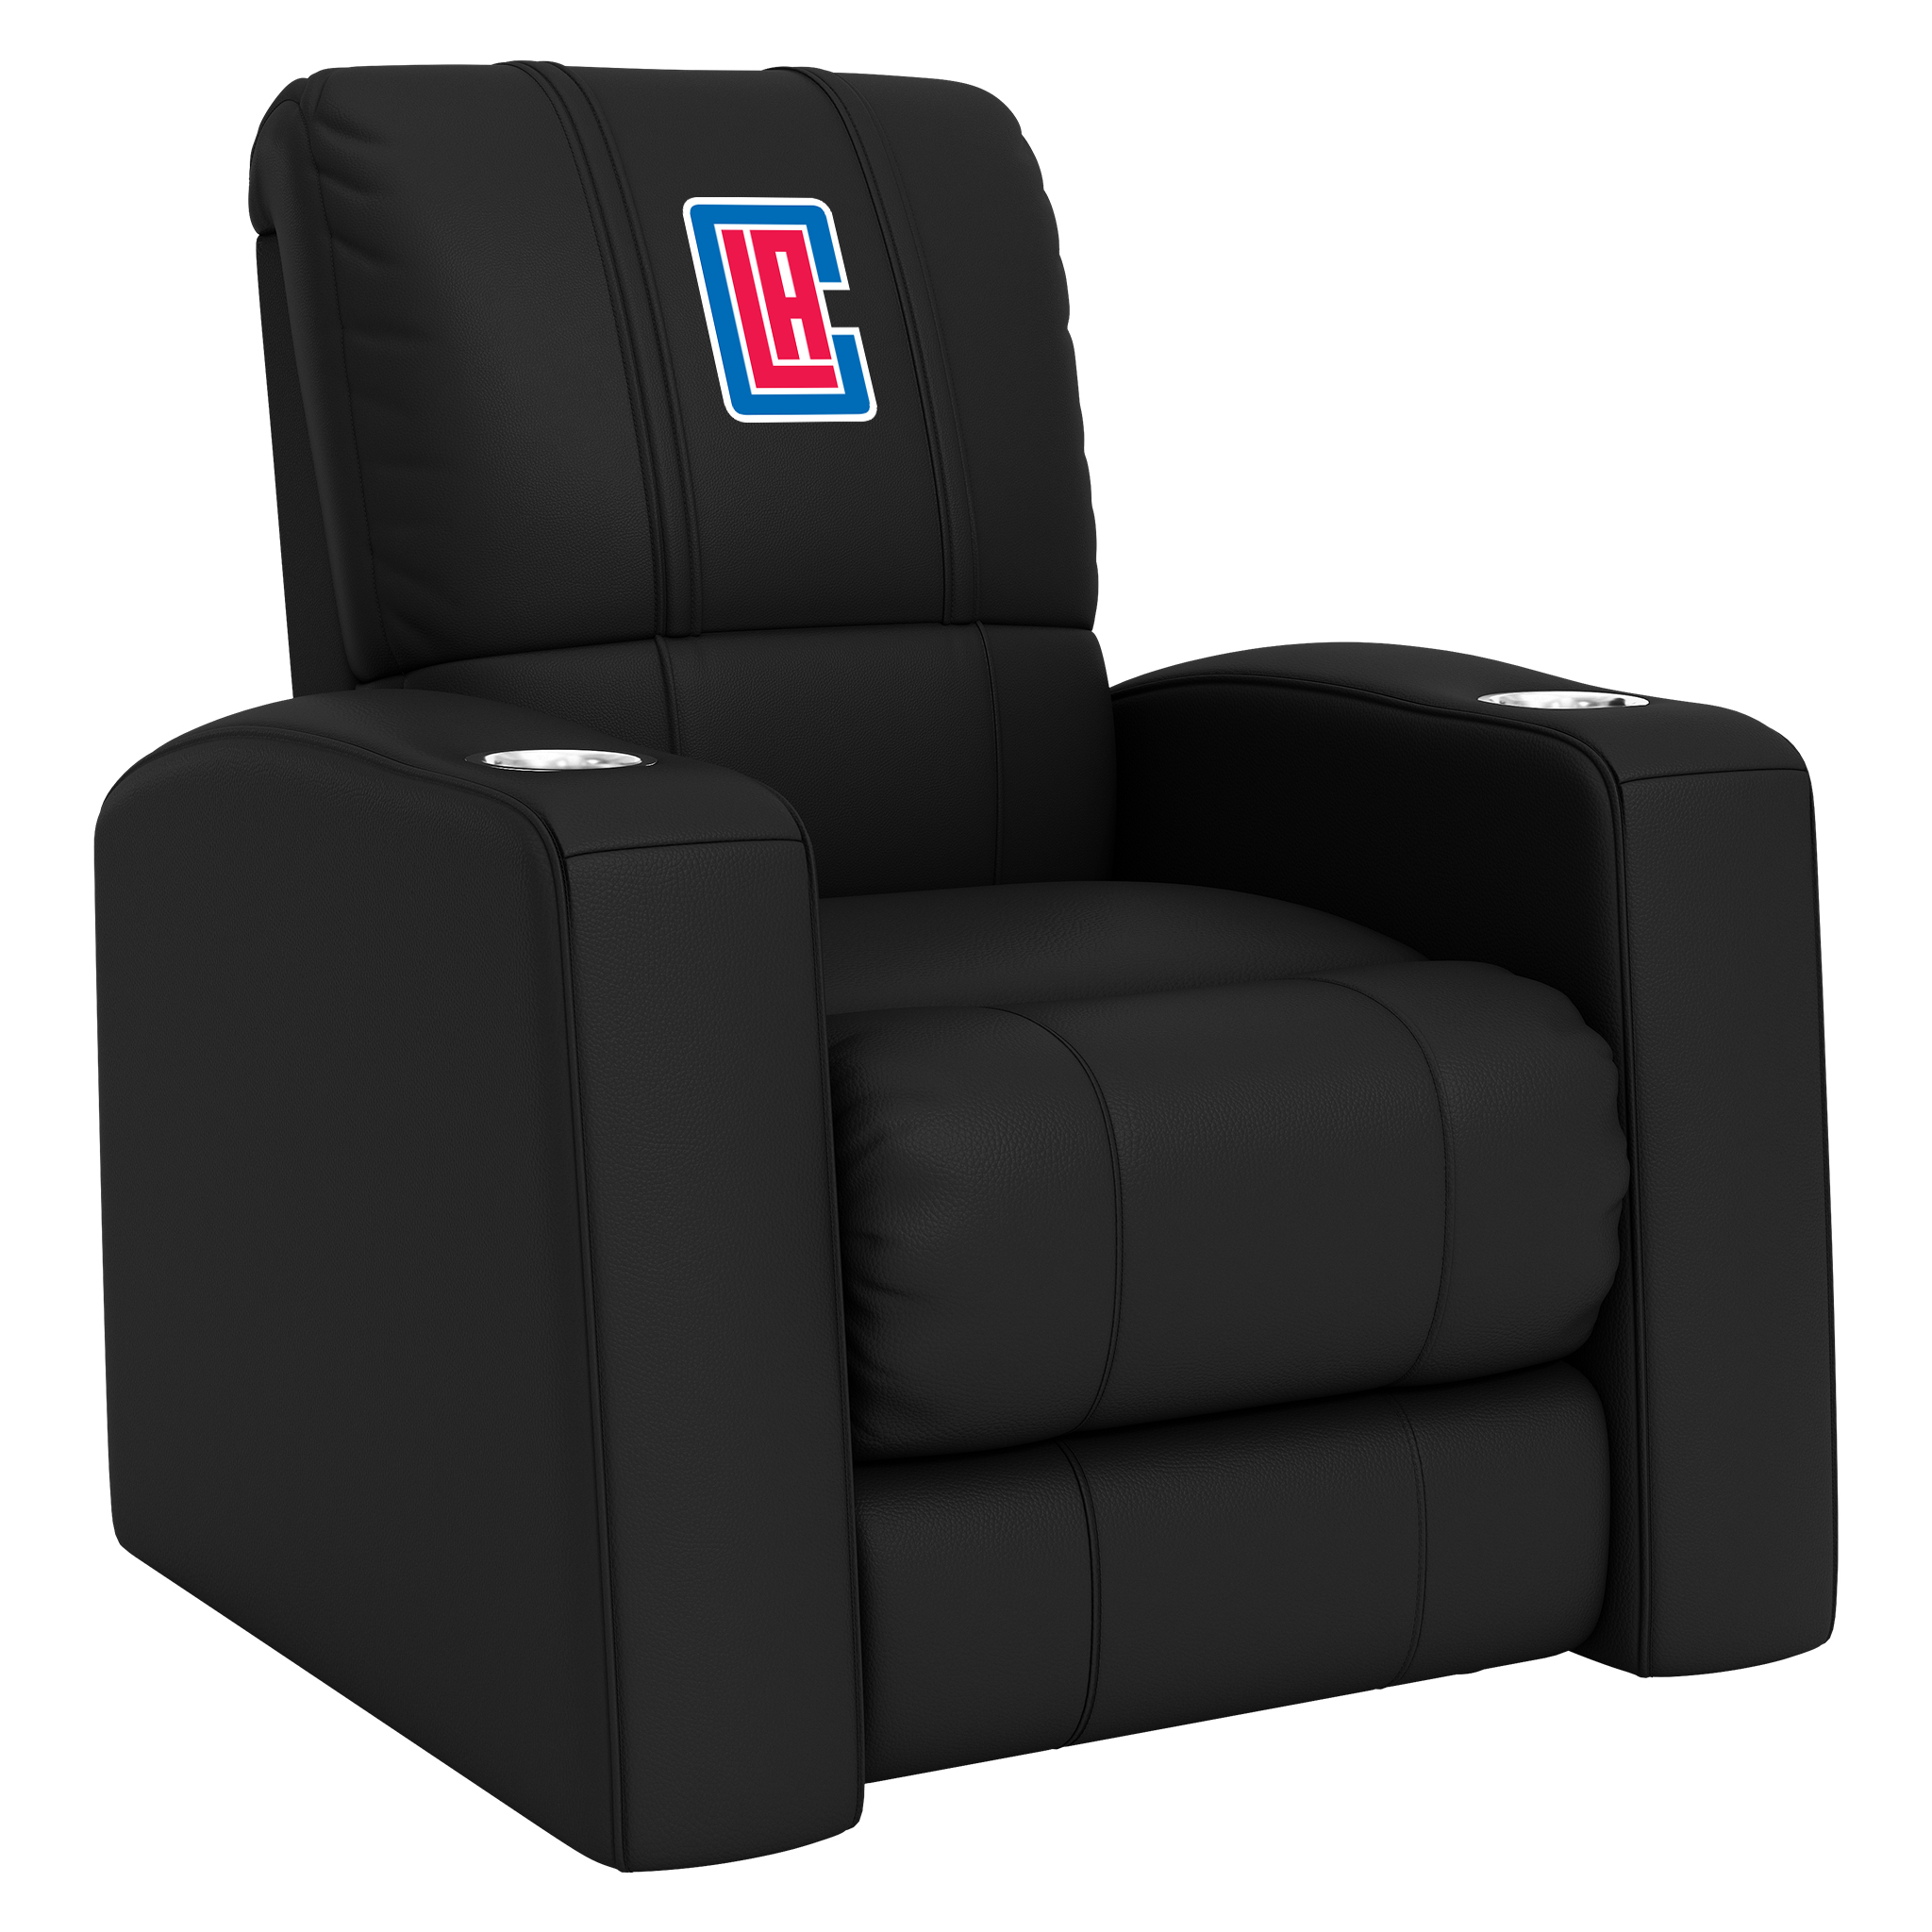 Los Angeles Clippers Home Theater Recliner with Los Angeles Clippers Secondary